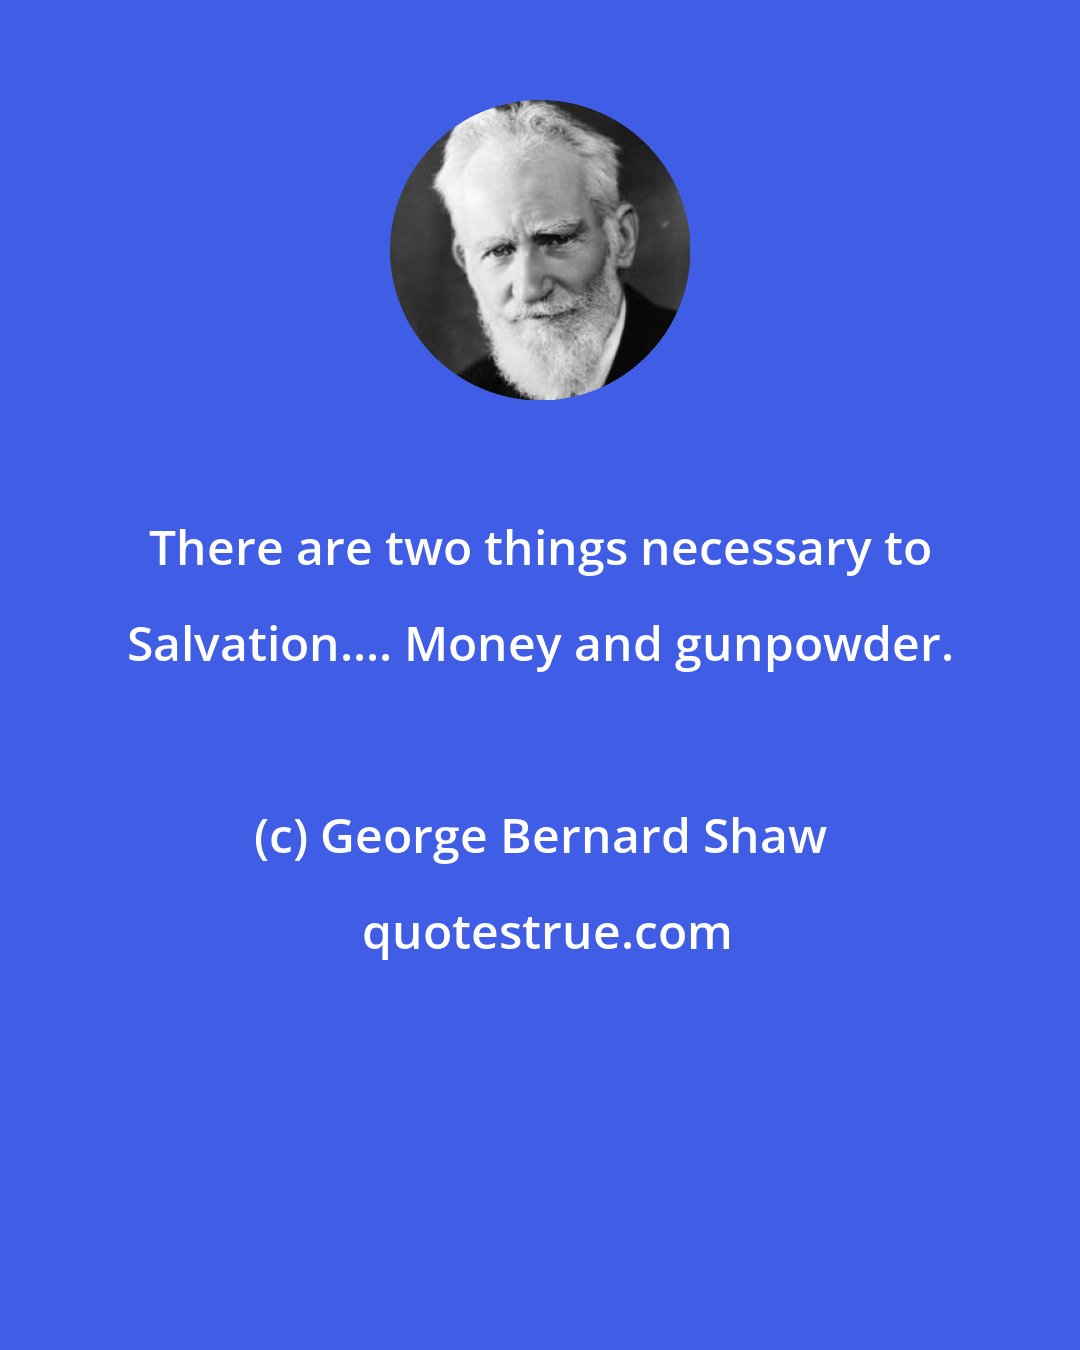 George Bernard Shaw: There are two things necessary to Salvation.... Money and gunpowder.